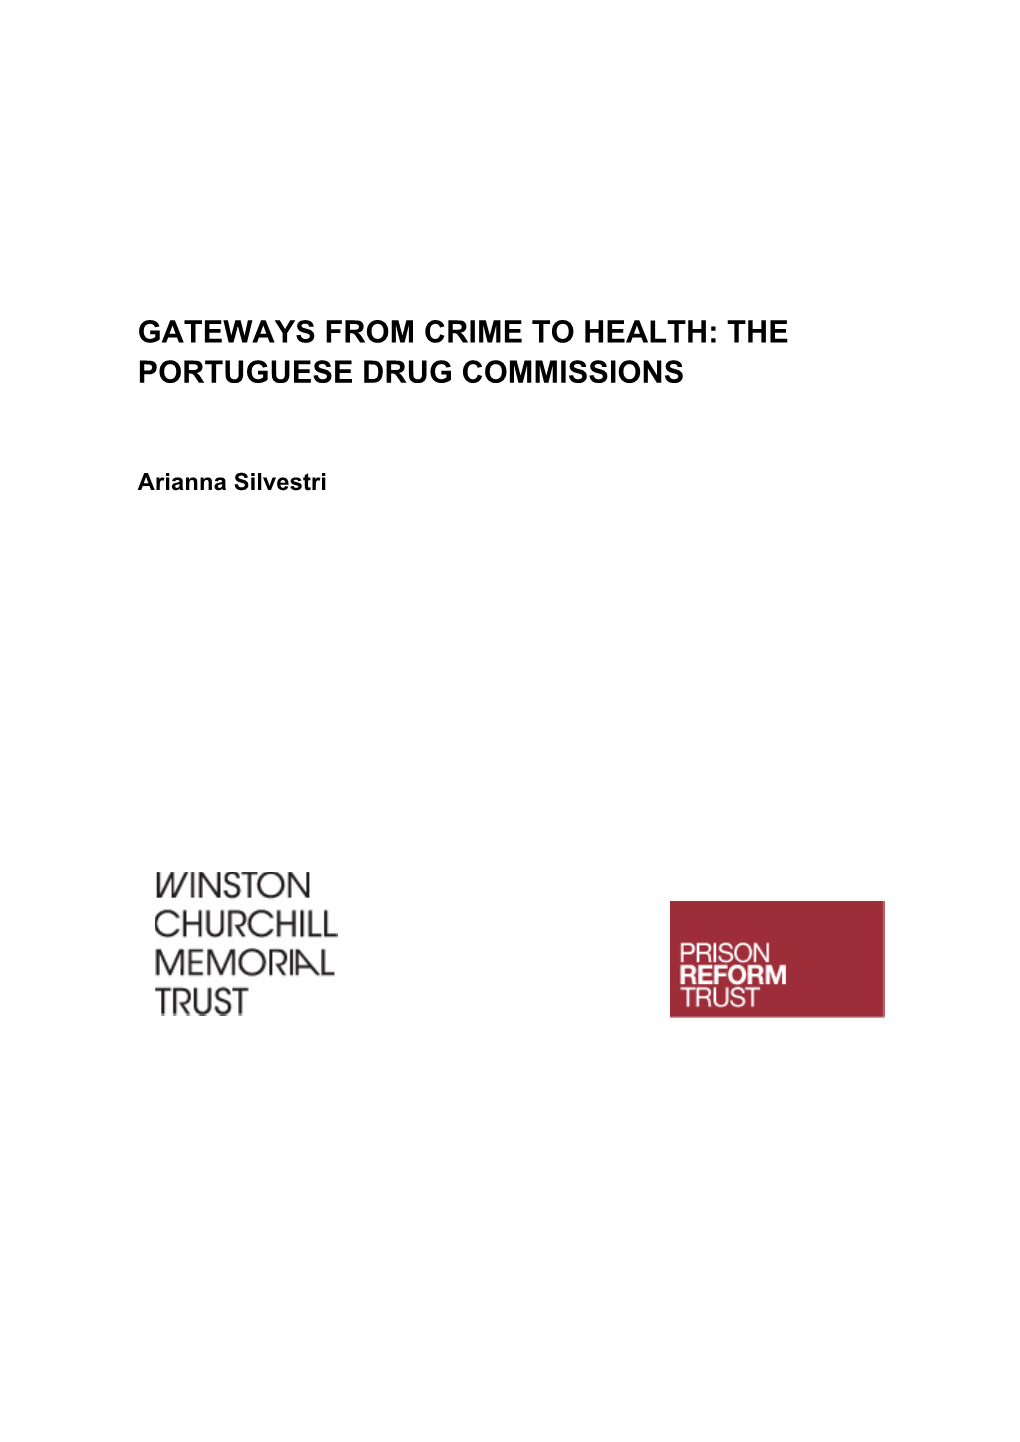 Gateways from Crime to Health: the Portuguese Drug Commissions